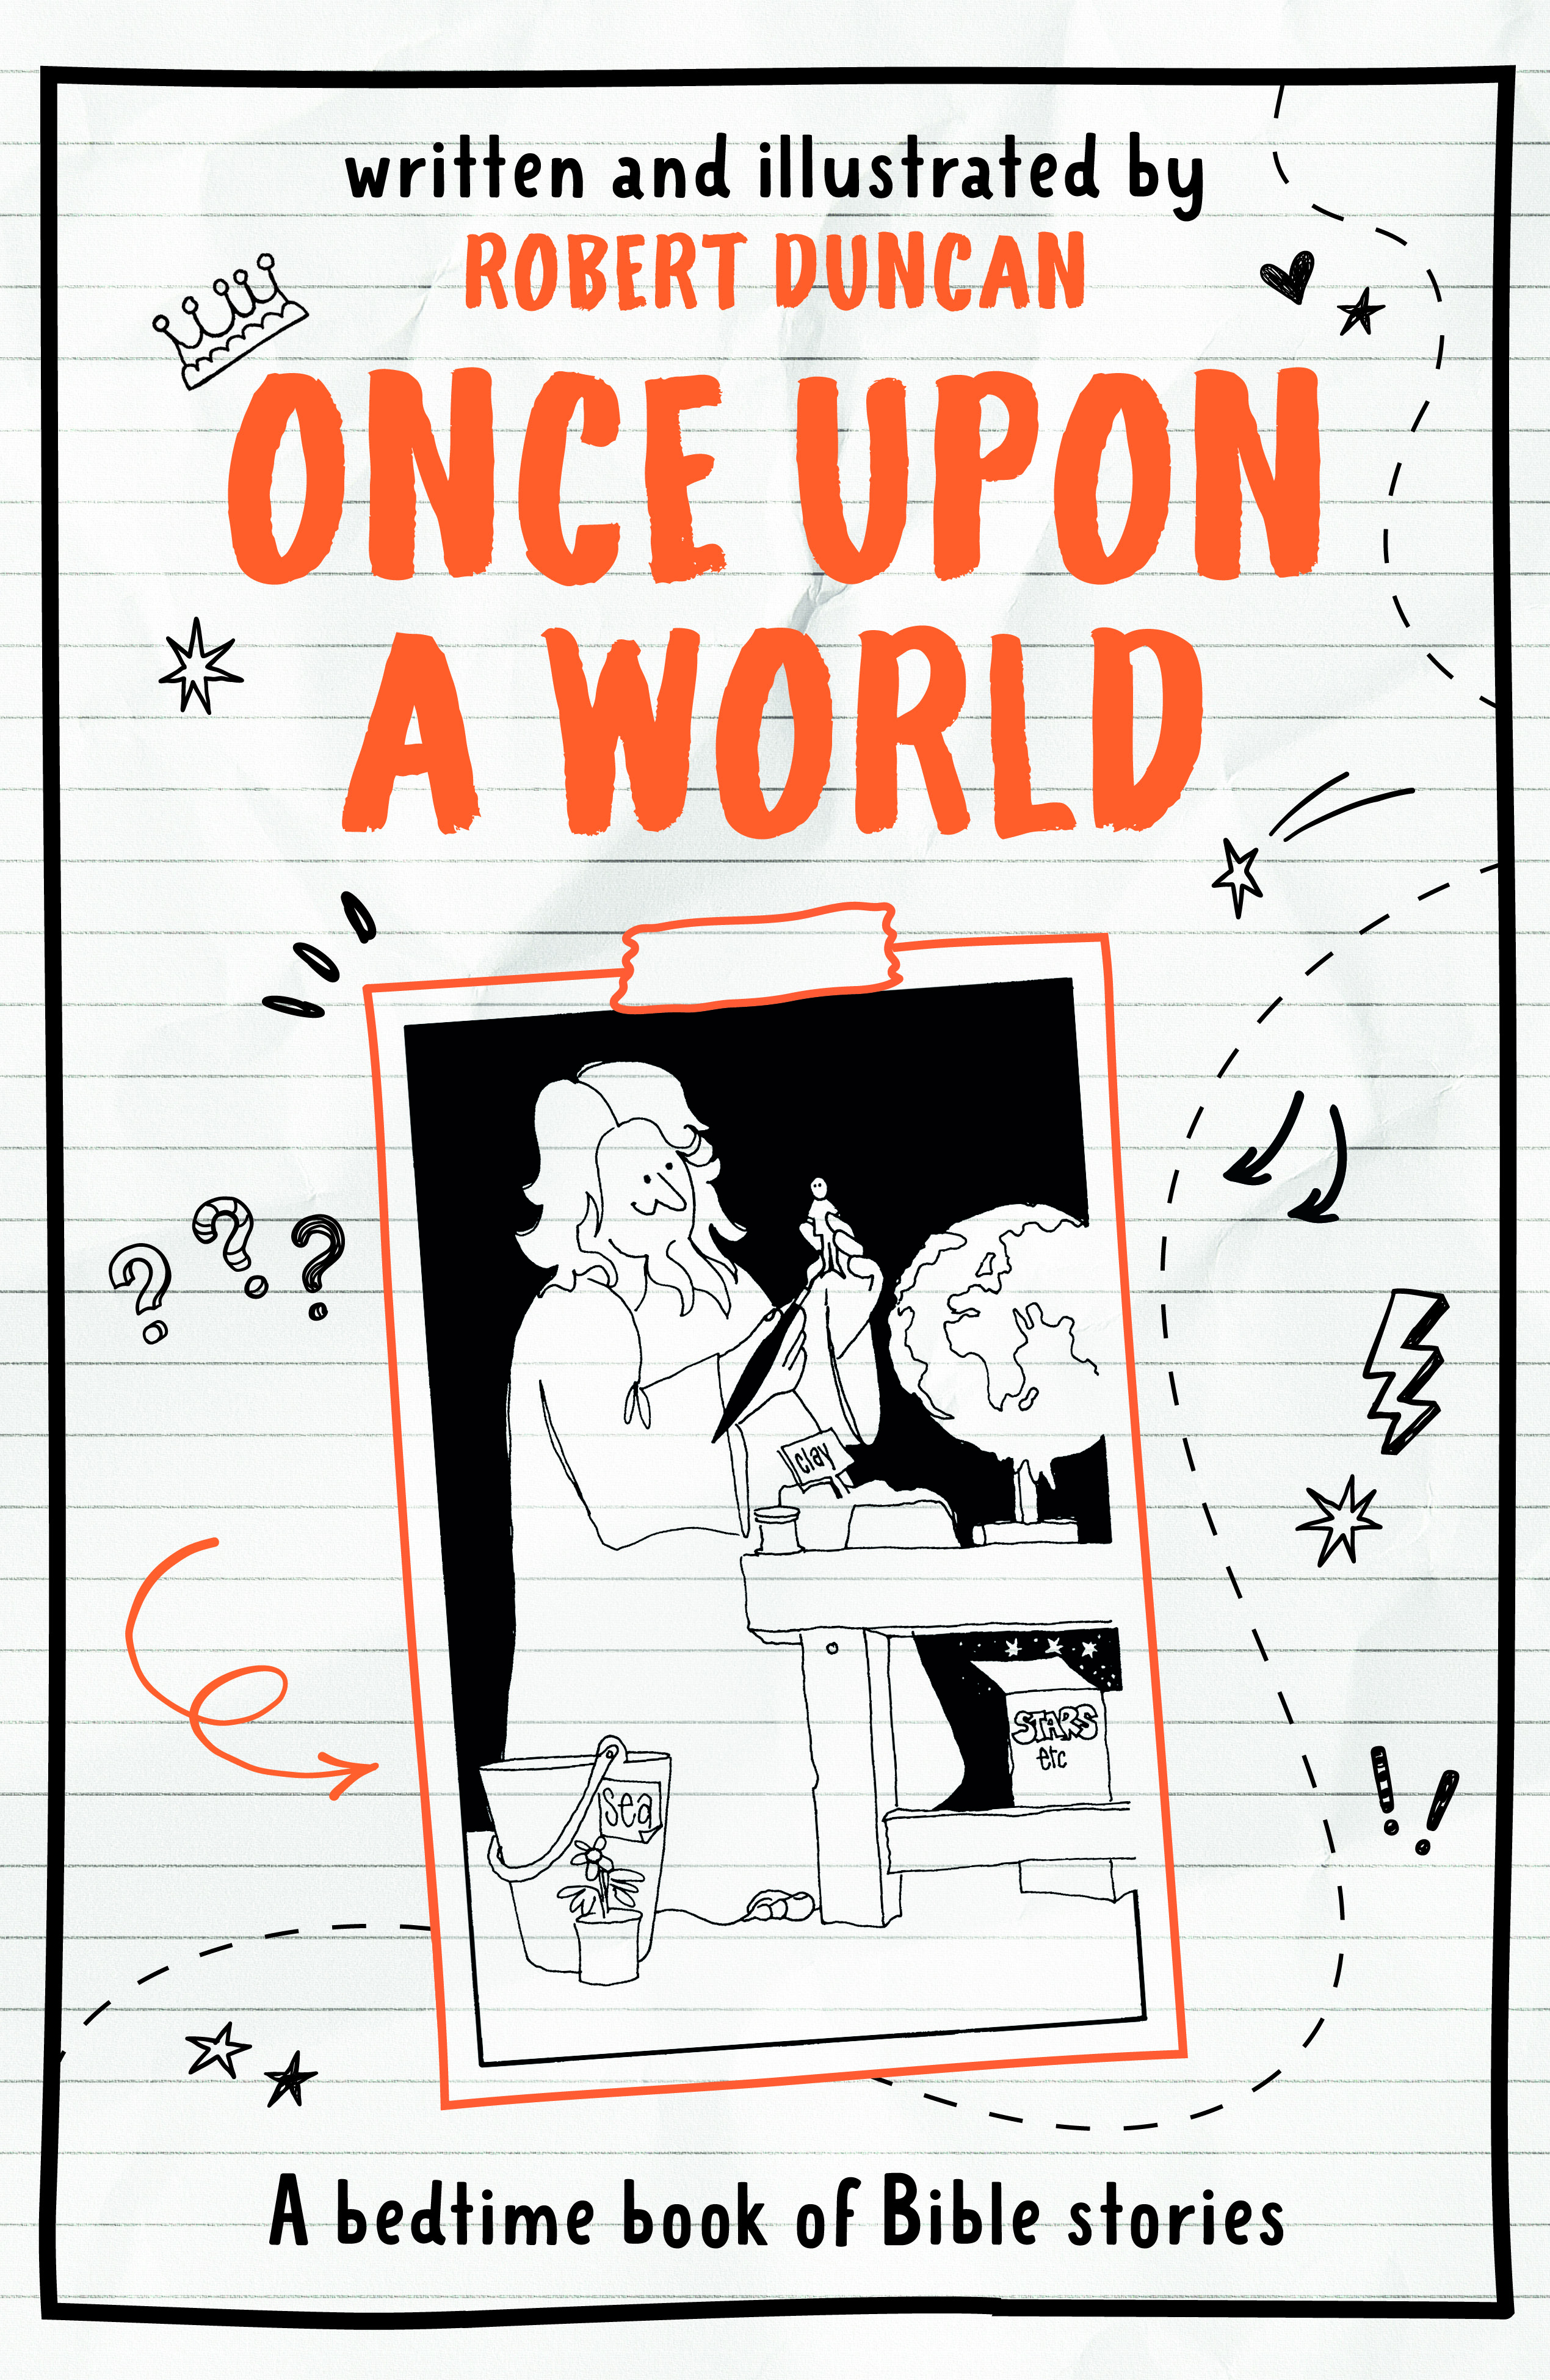 Once Upon a World: A bedtime book of Bible stories